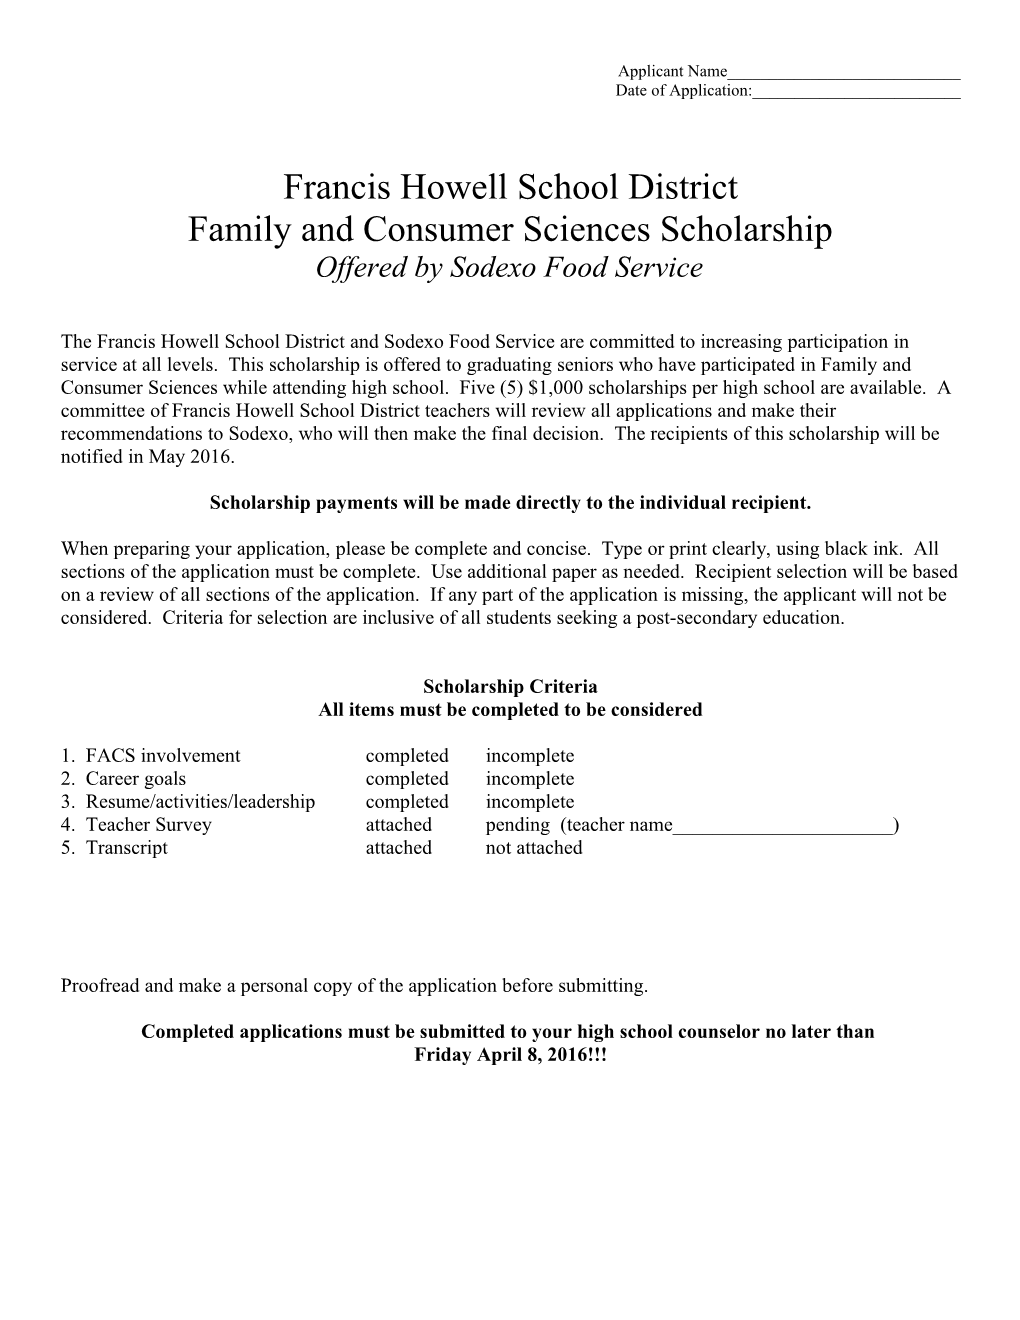 Francis Howell School District s1